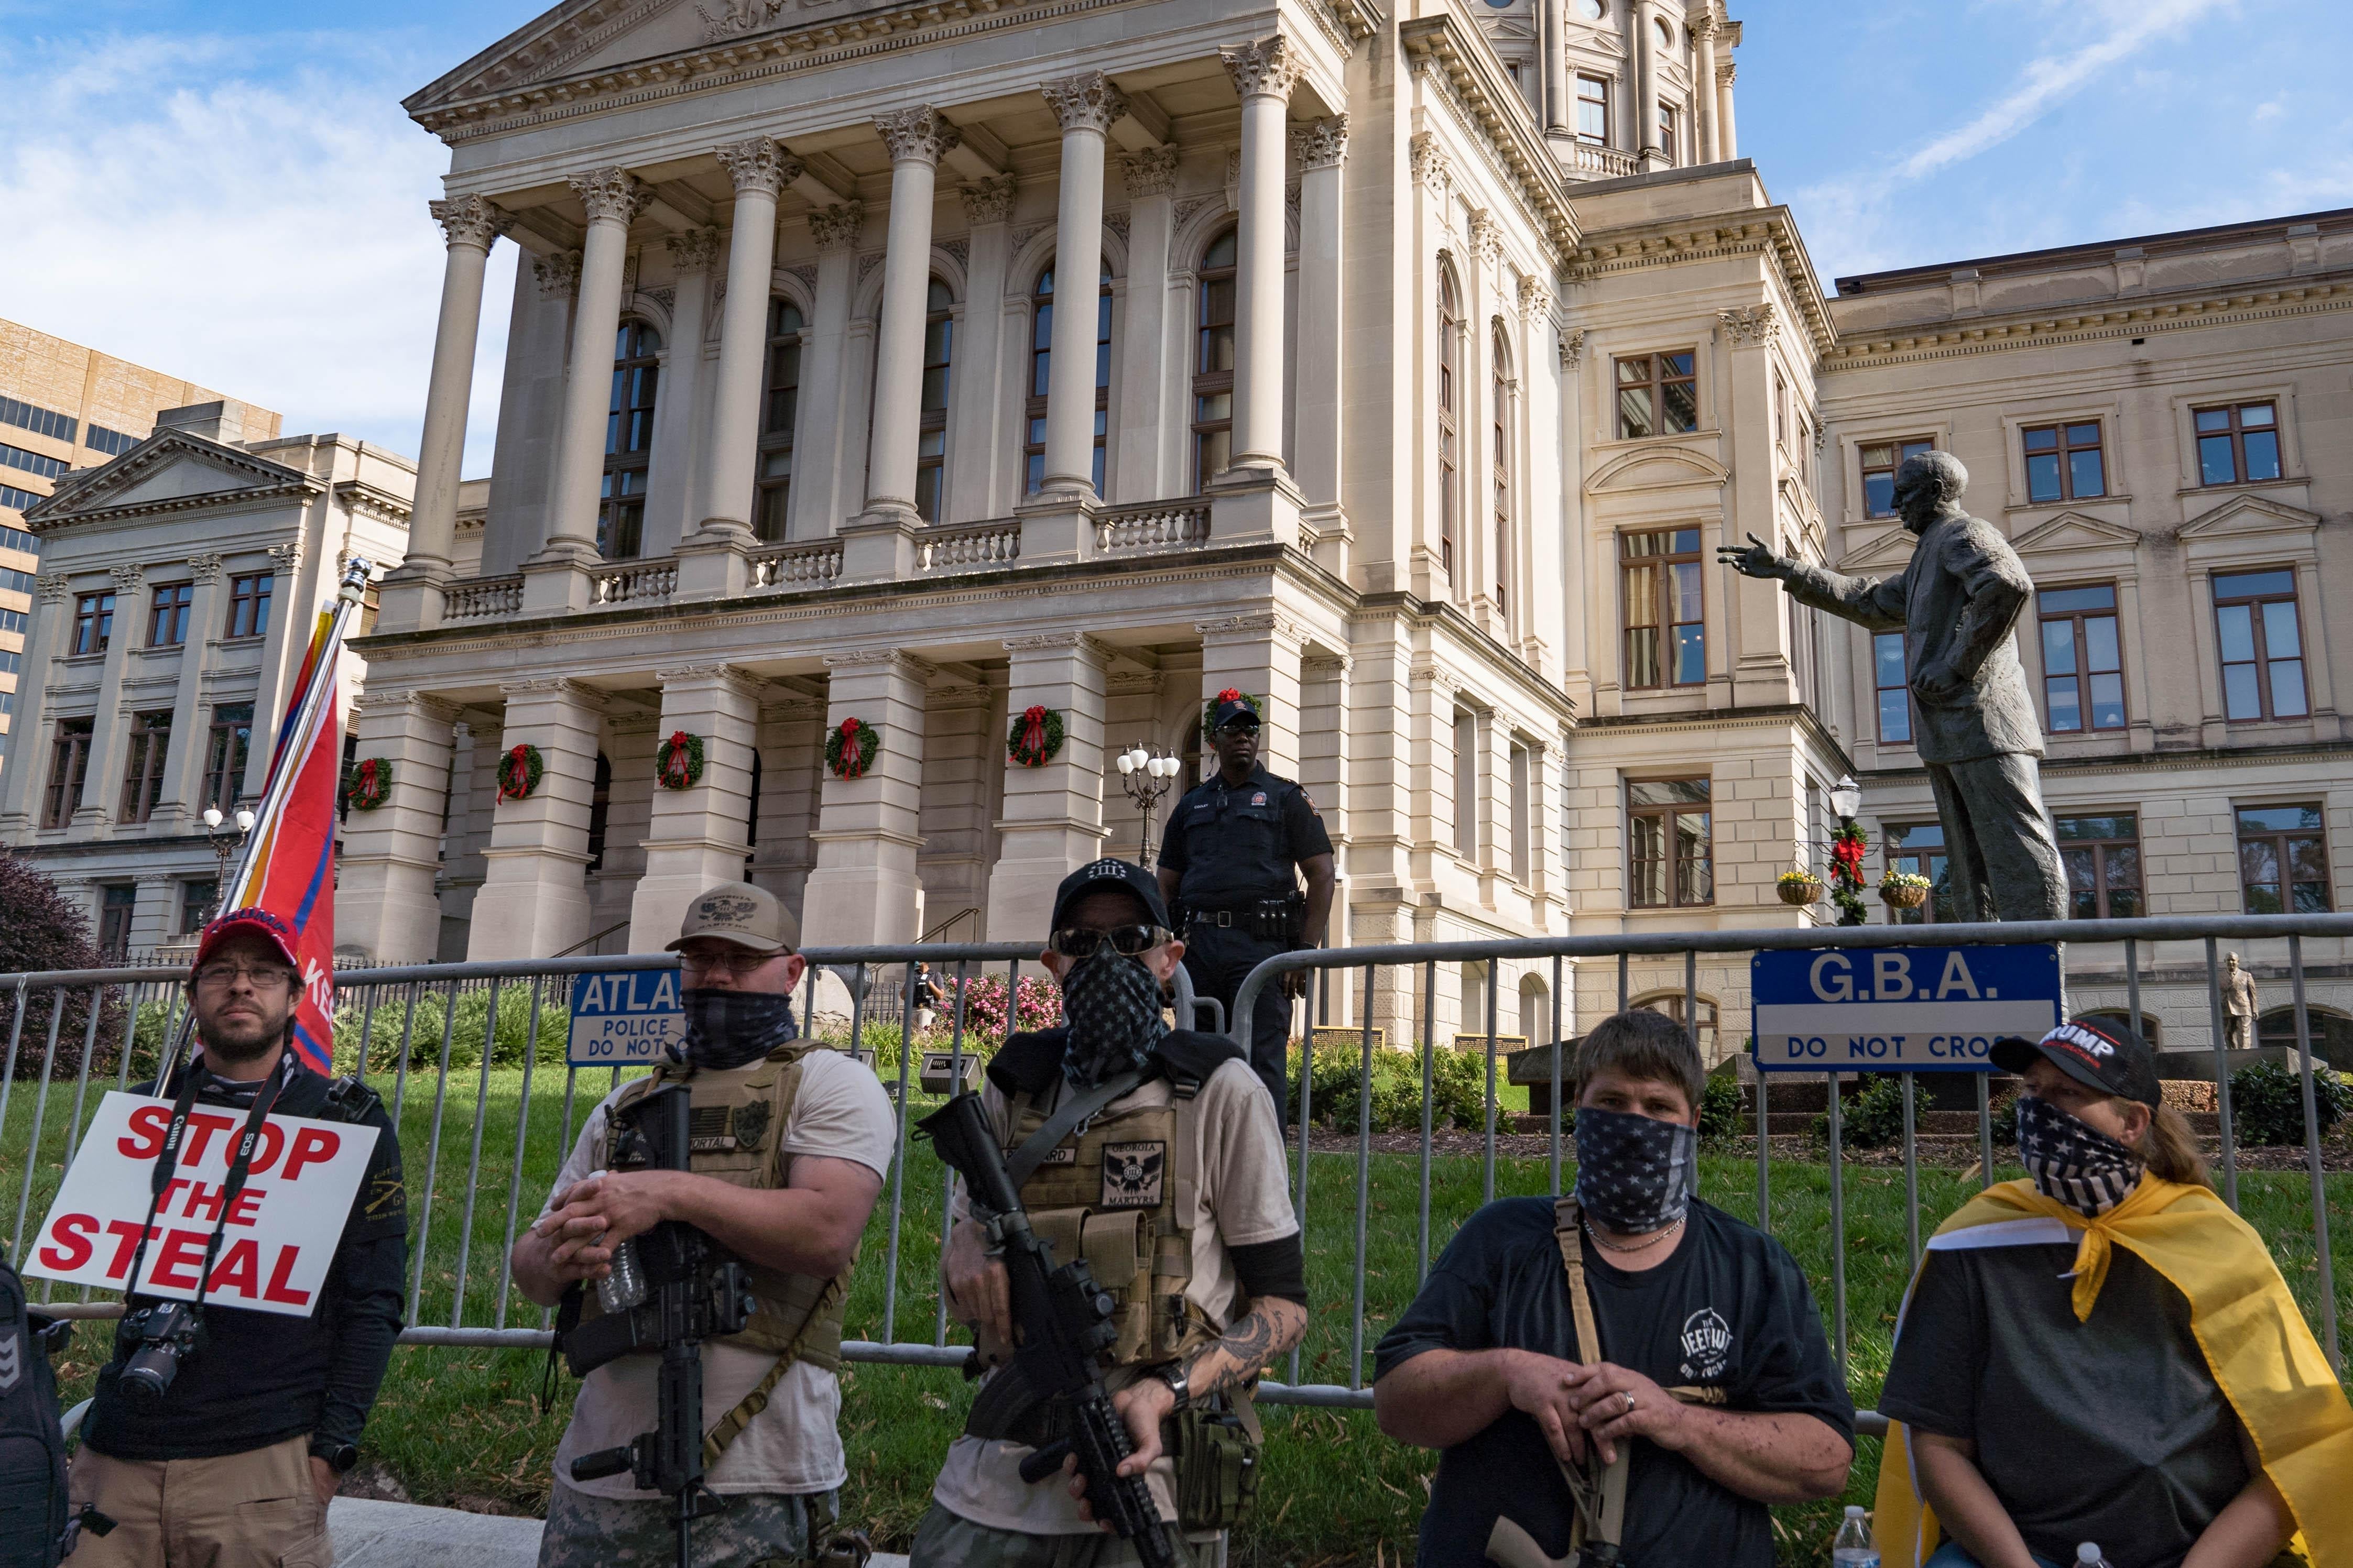 Armed men with bandannas over their faces stand in front of the Georgia State Capitol building.